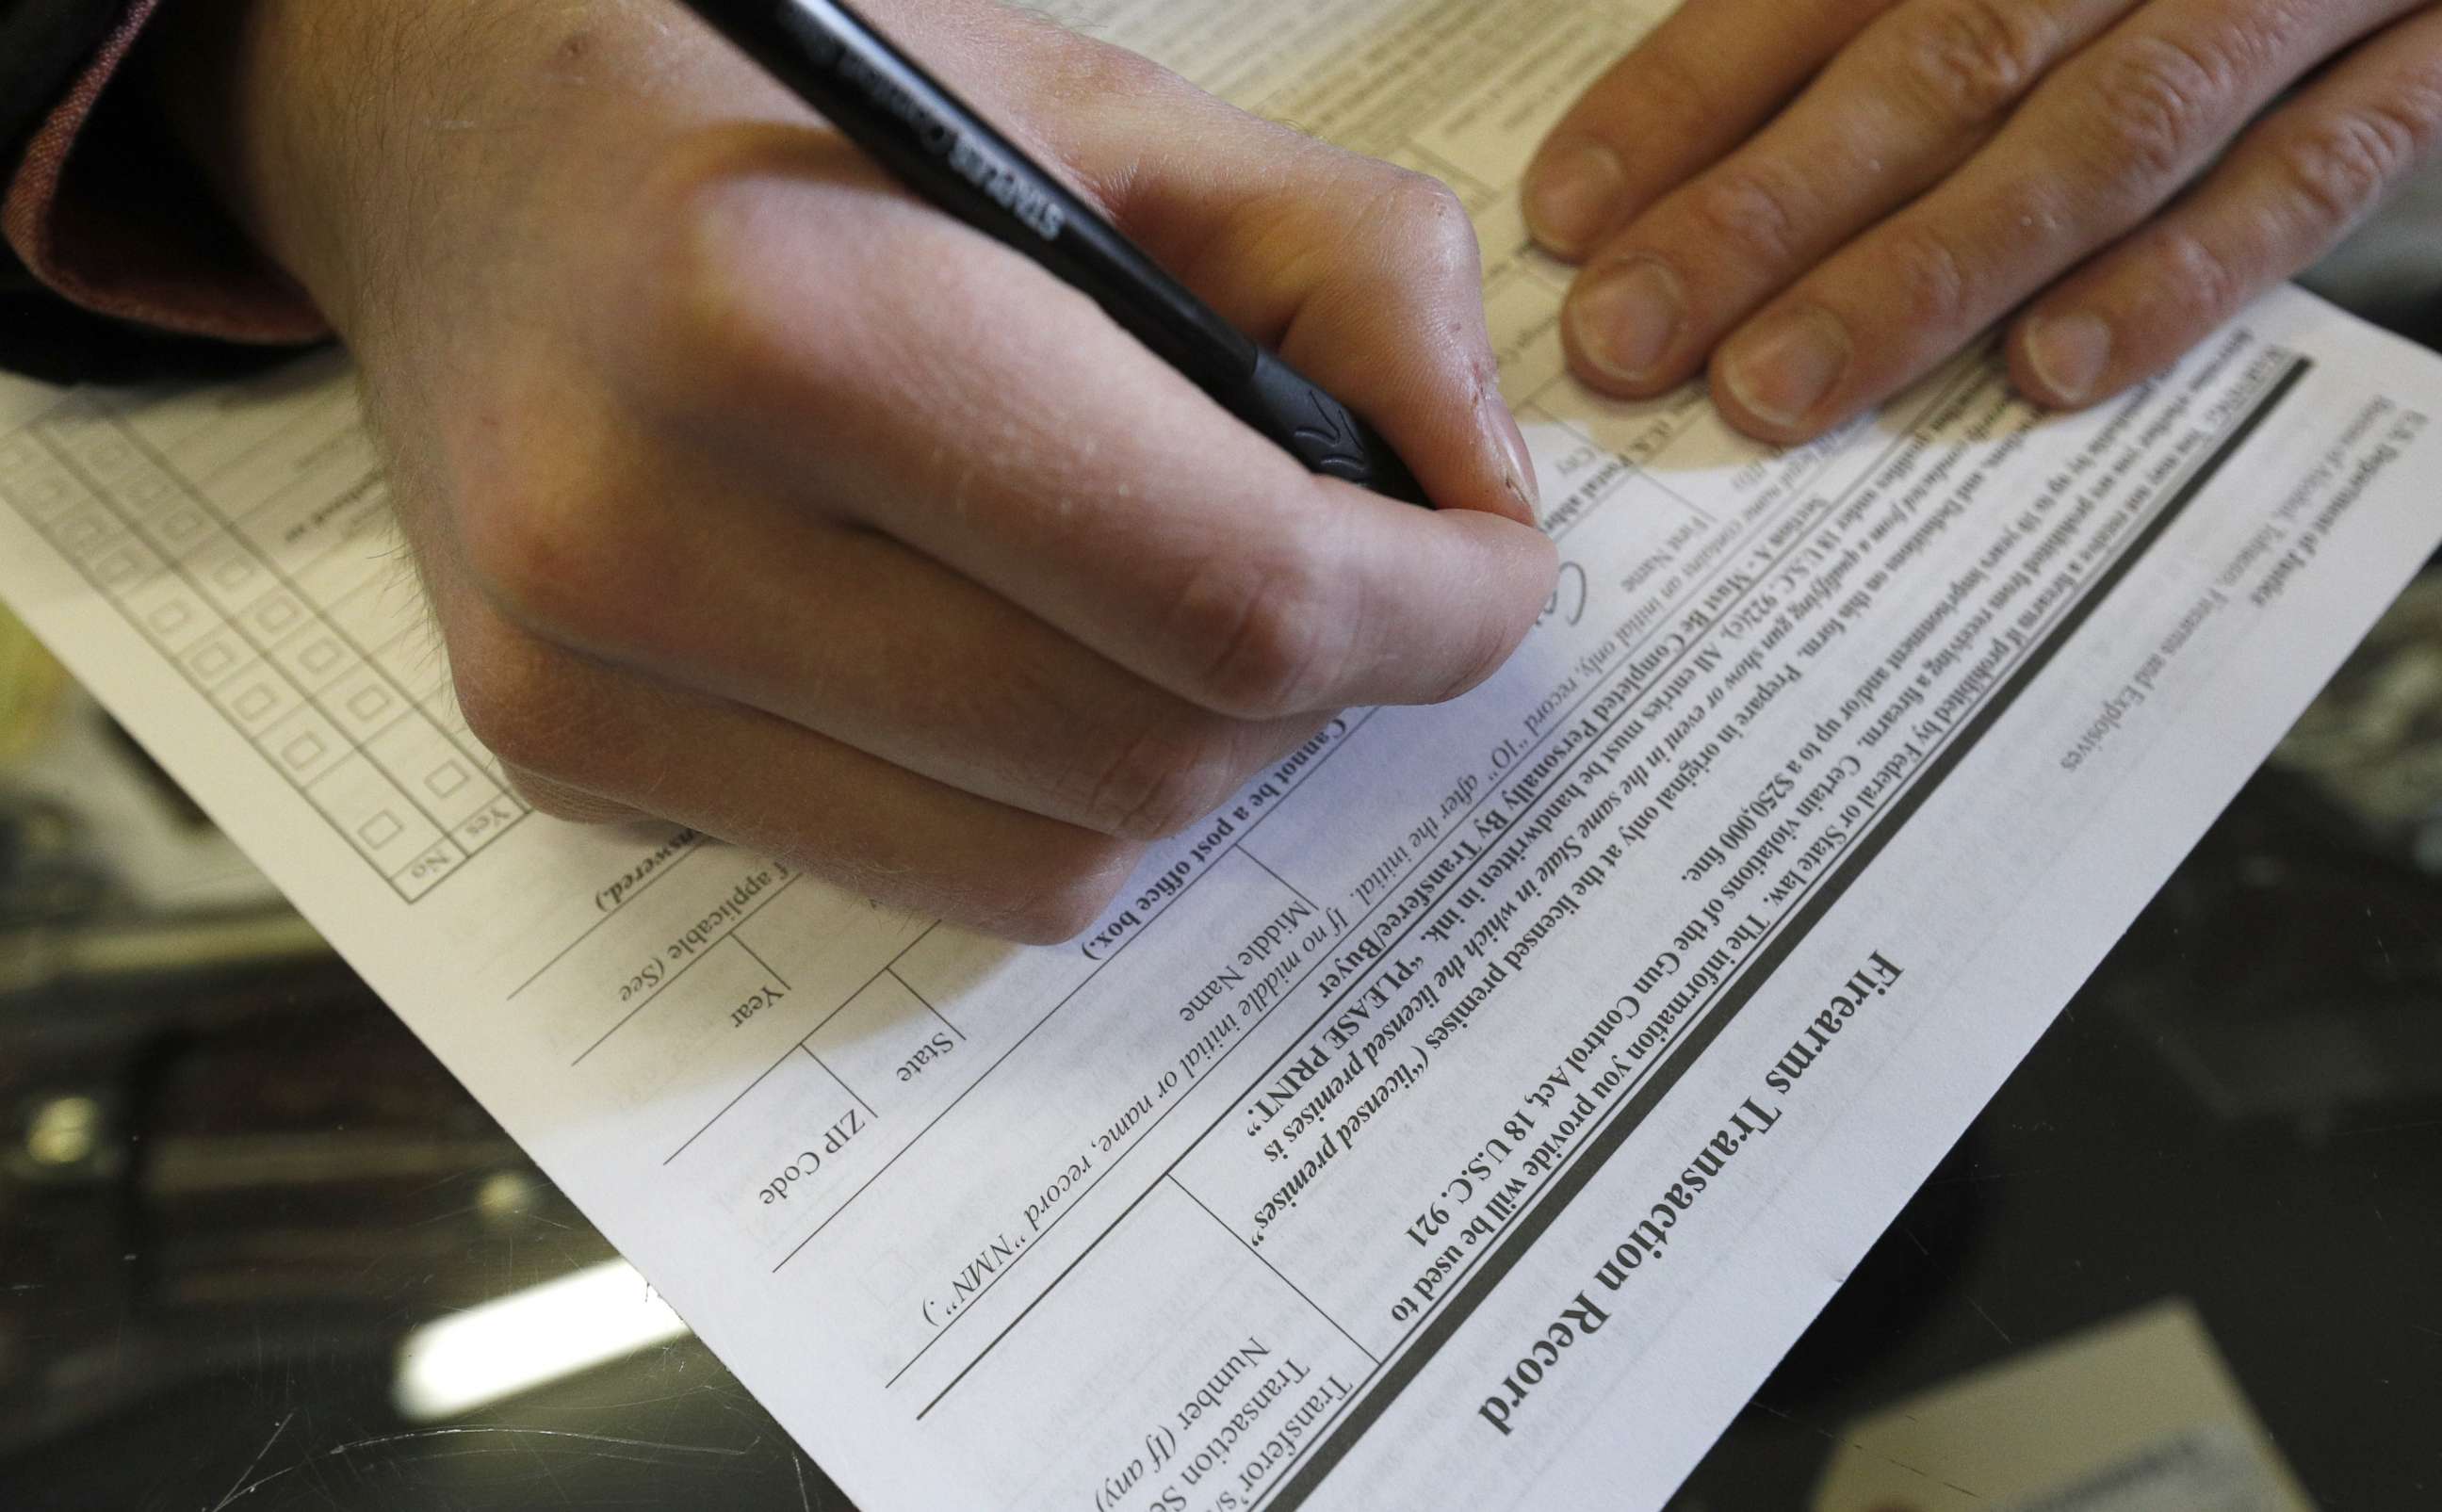 PHOTO: A man fills out a federal background check form at a gun retailer on Feb. 15, 2018 in Orem, Utah.